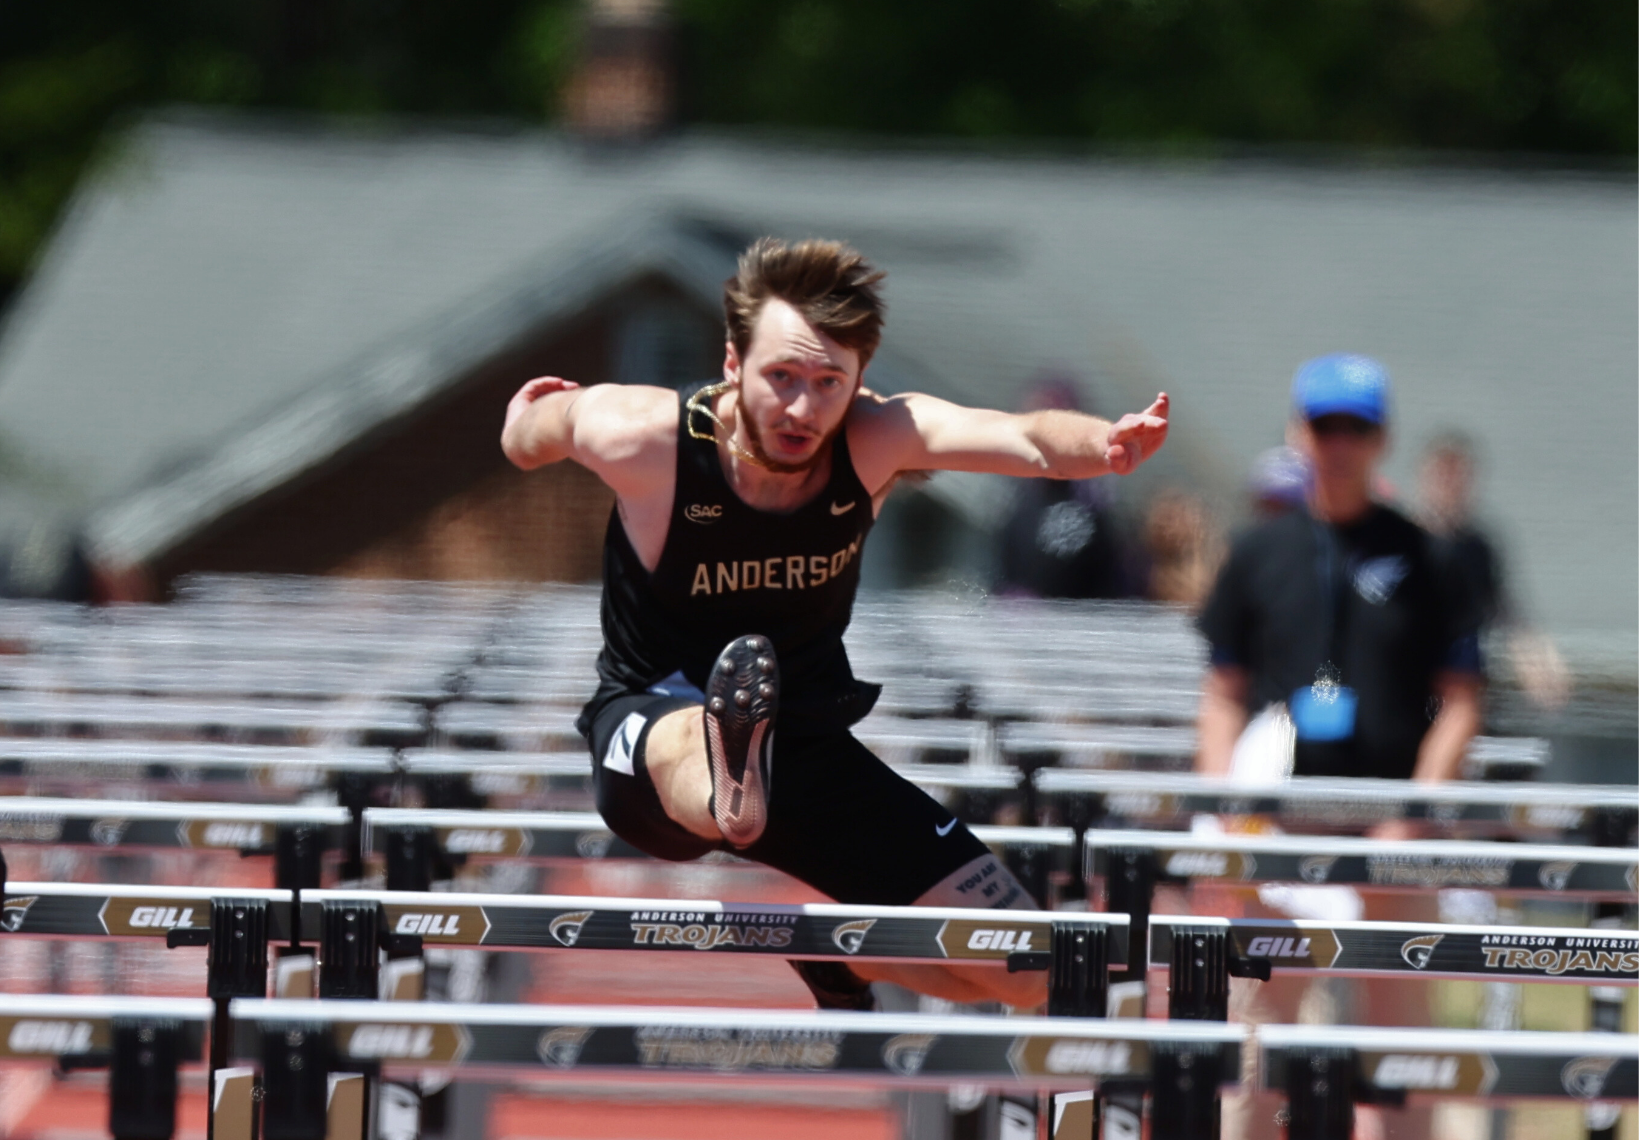 Track Gears Up for Top Competition at Wake Forest, Georgia Tech